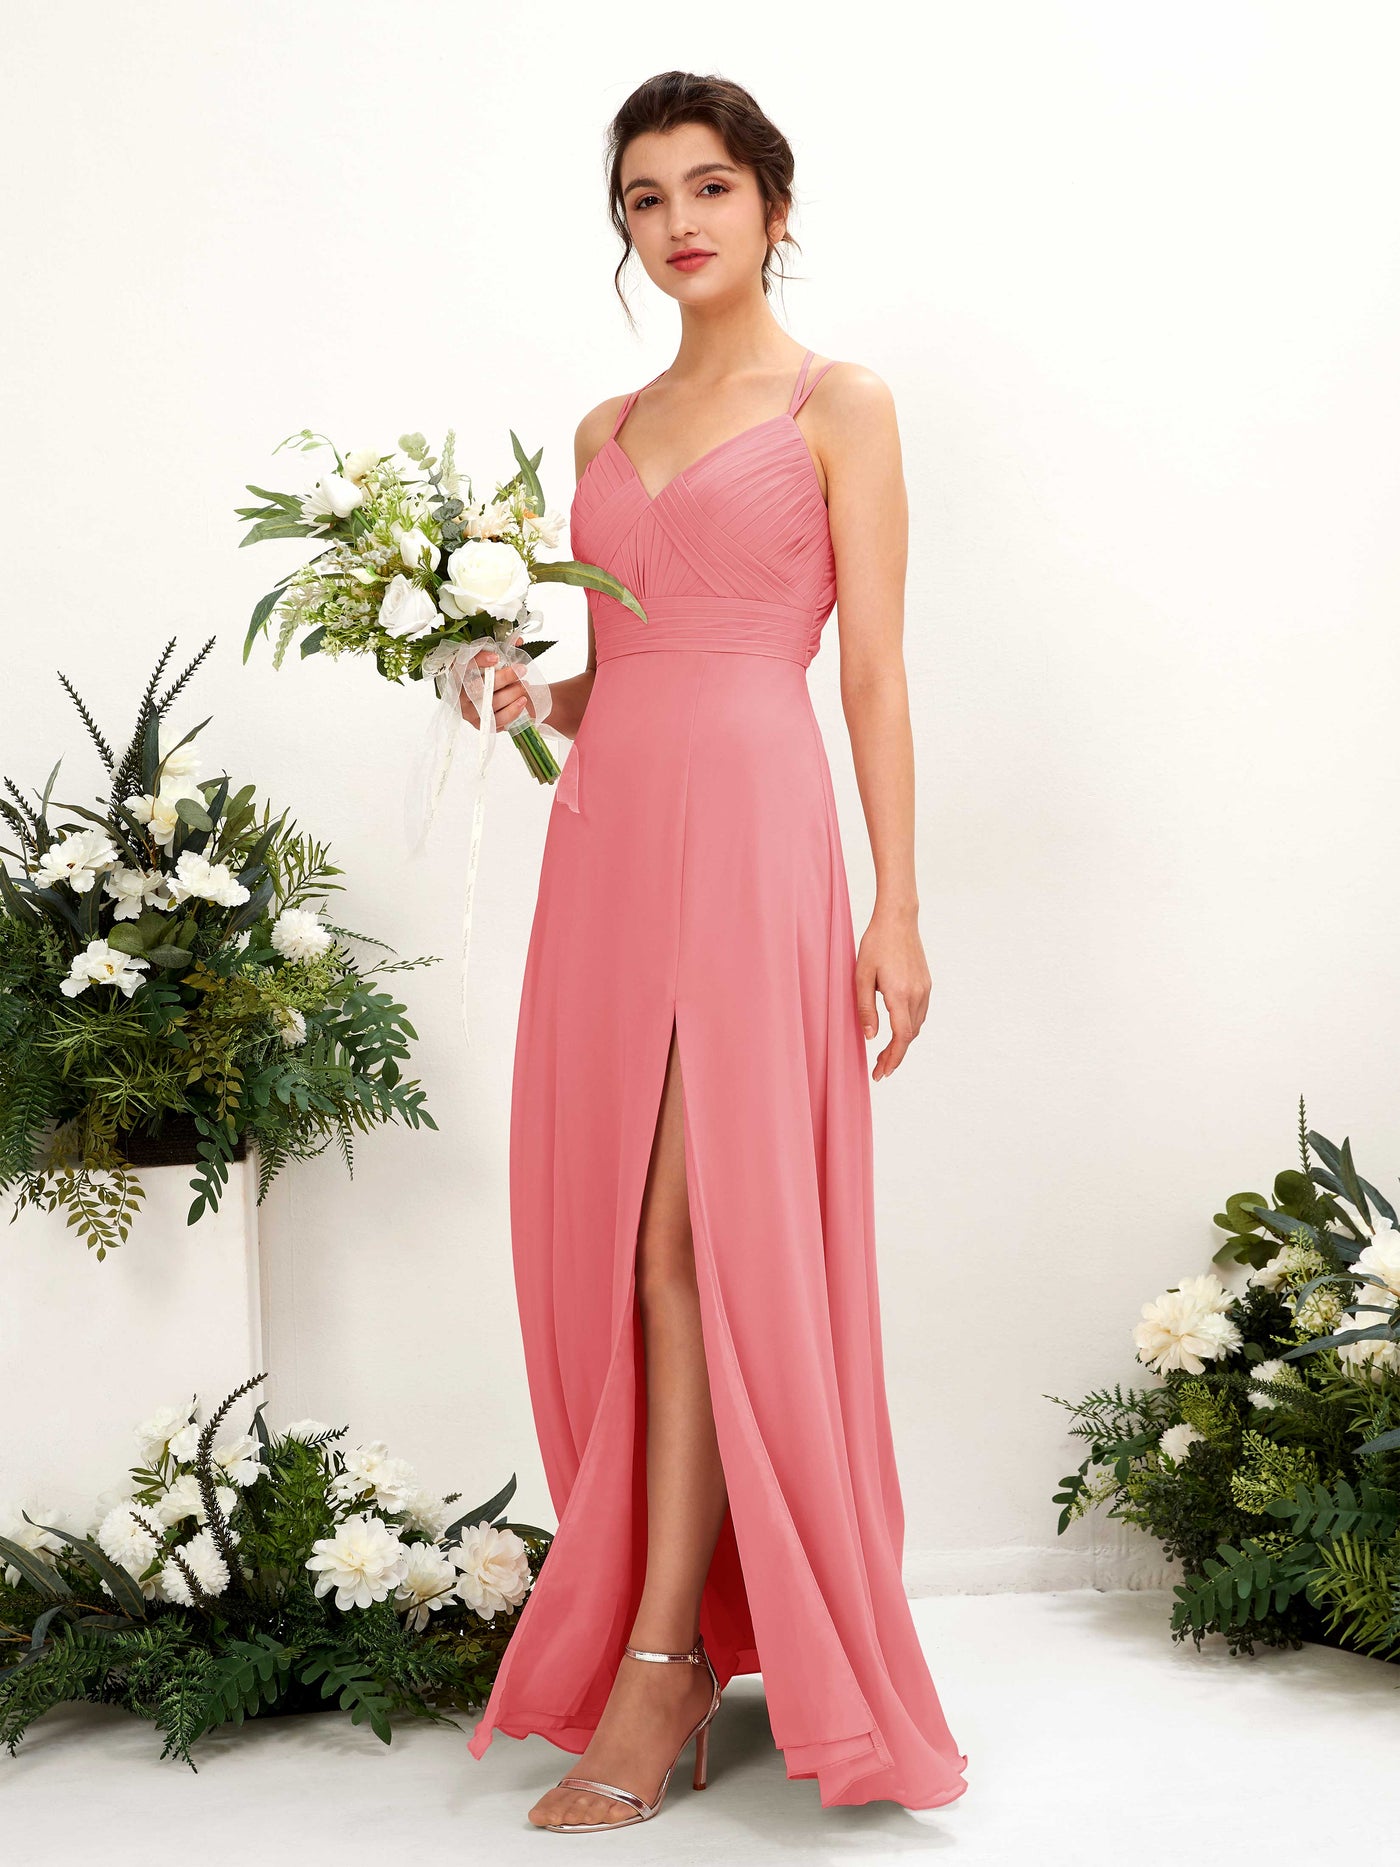 Coral Pink Bridesmaid Dresses Bridesmaid Dress A-line Chiffon Spaghetti-straps Full Length Sleeveless Wedding Party Dress (81225430)#color_coral-pink